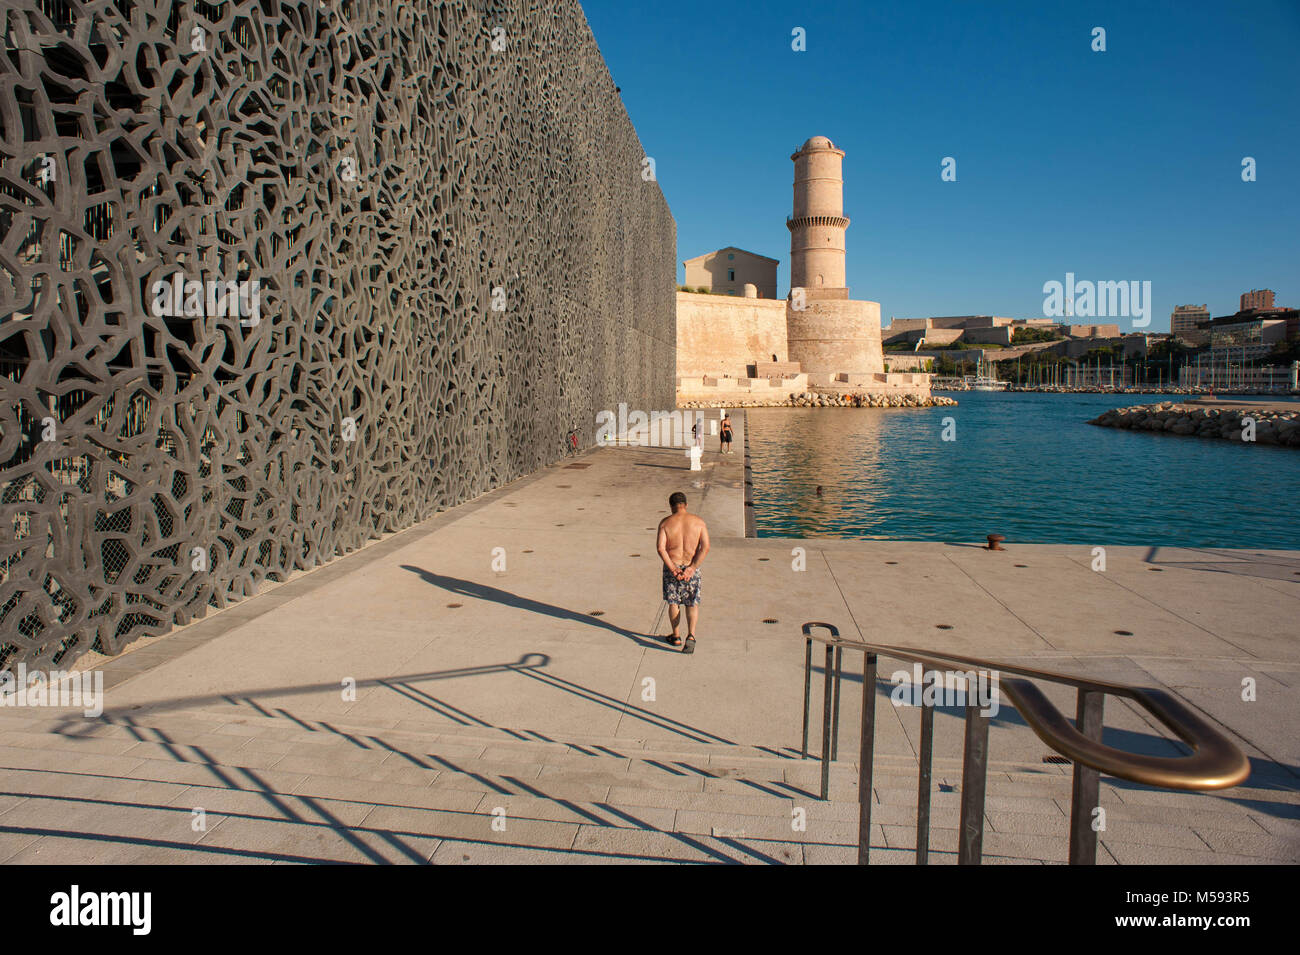 Marseille, France. Villa Mediterranee, Mucem. Museum on the culture and traditions of the Mediterranean Sea. Stock Photo